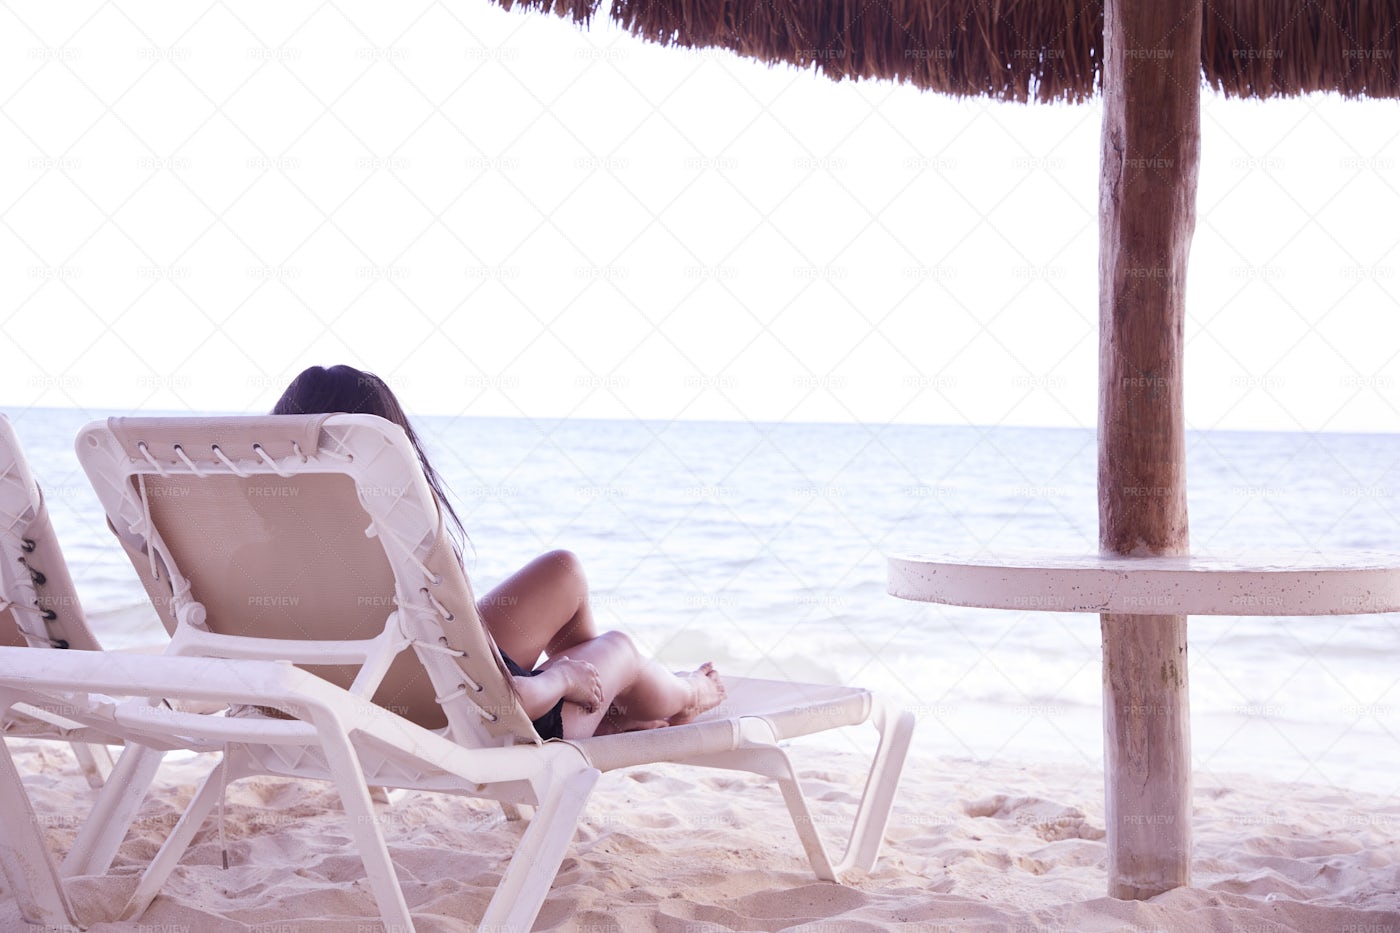 Reclining By the Shore: Stock Photos